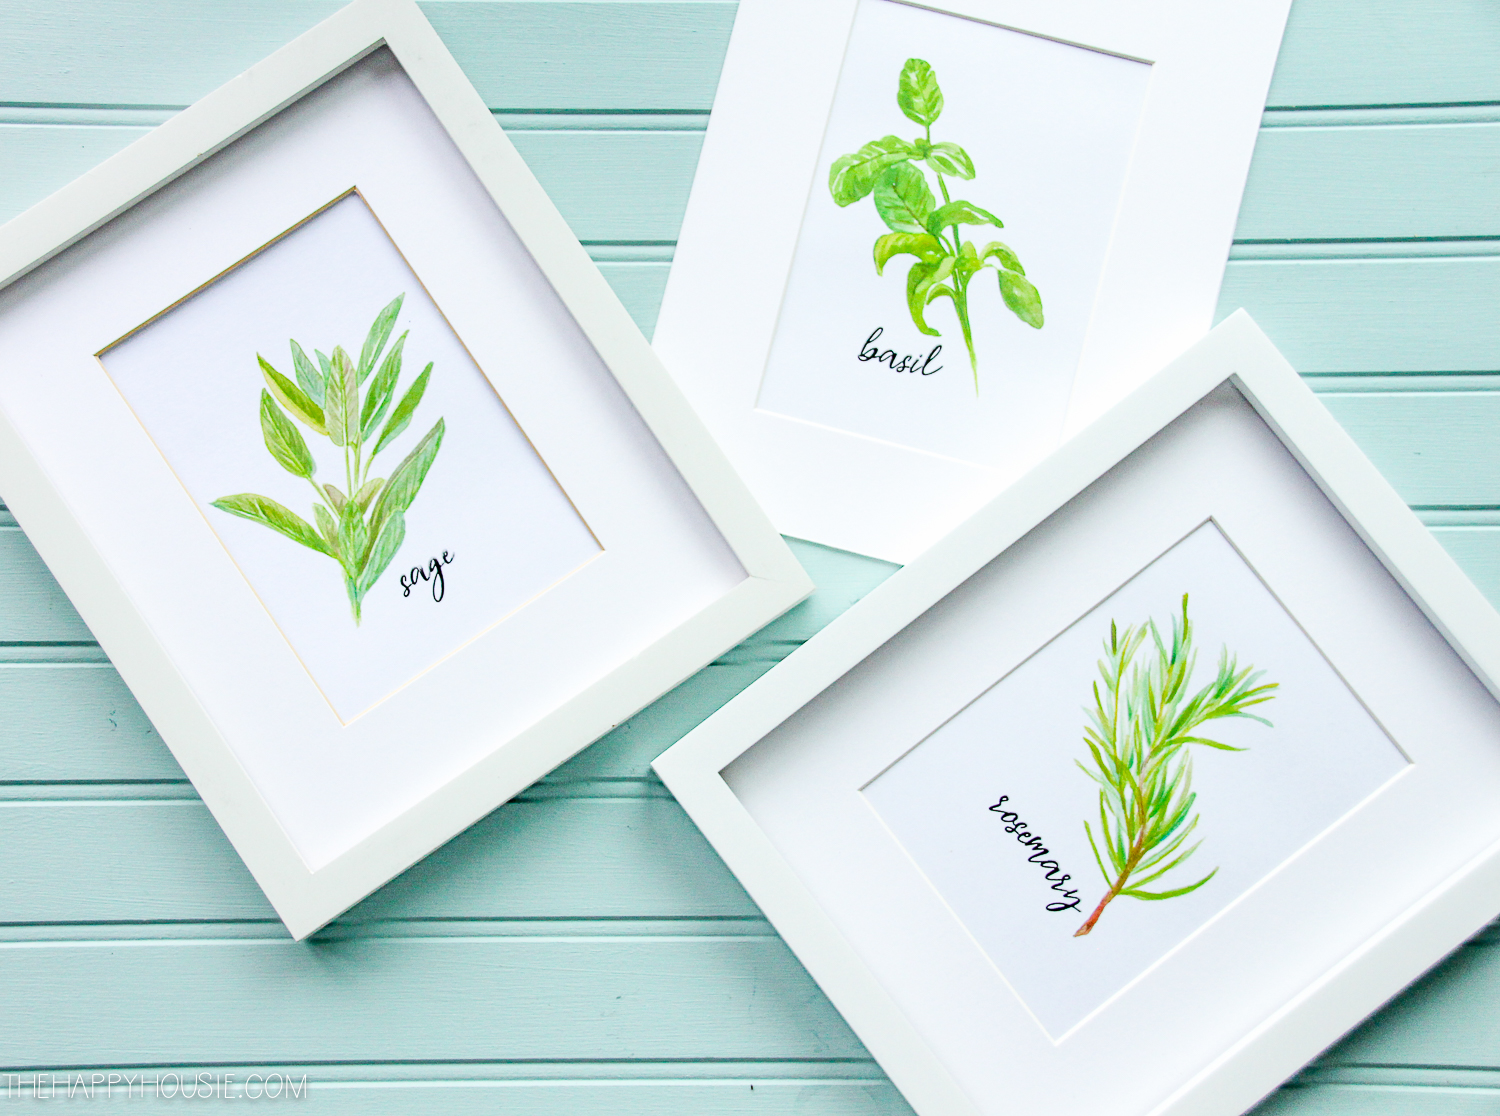 Herbs that are labelled and printed then framed in white frames.